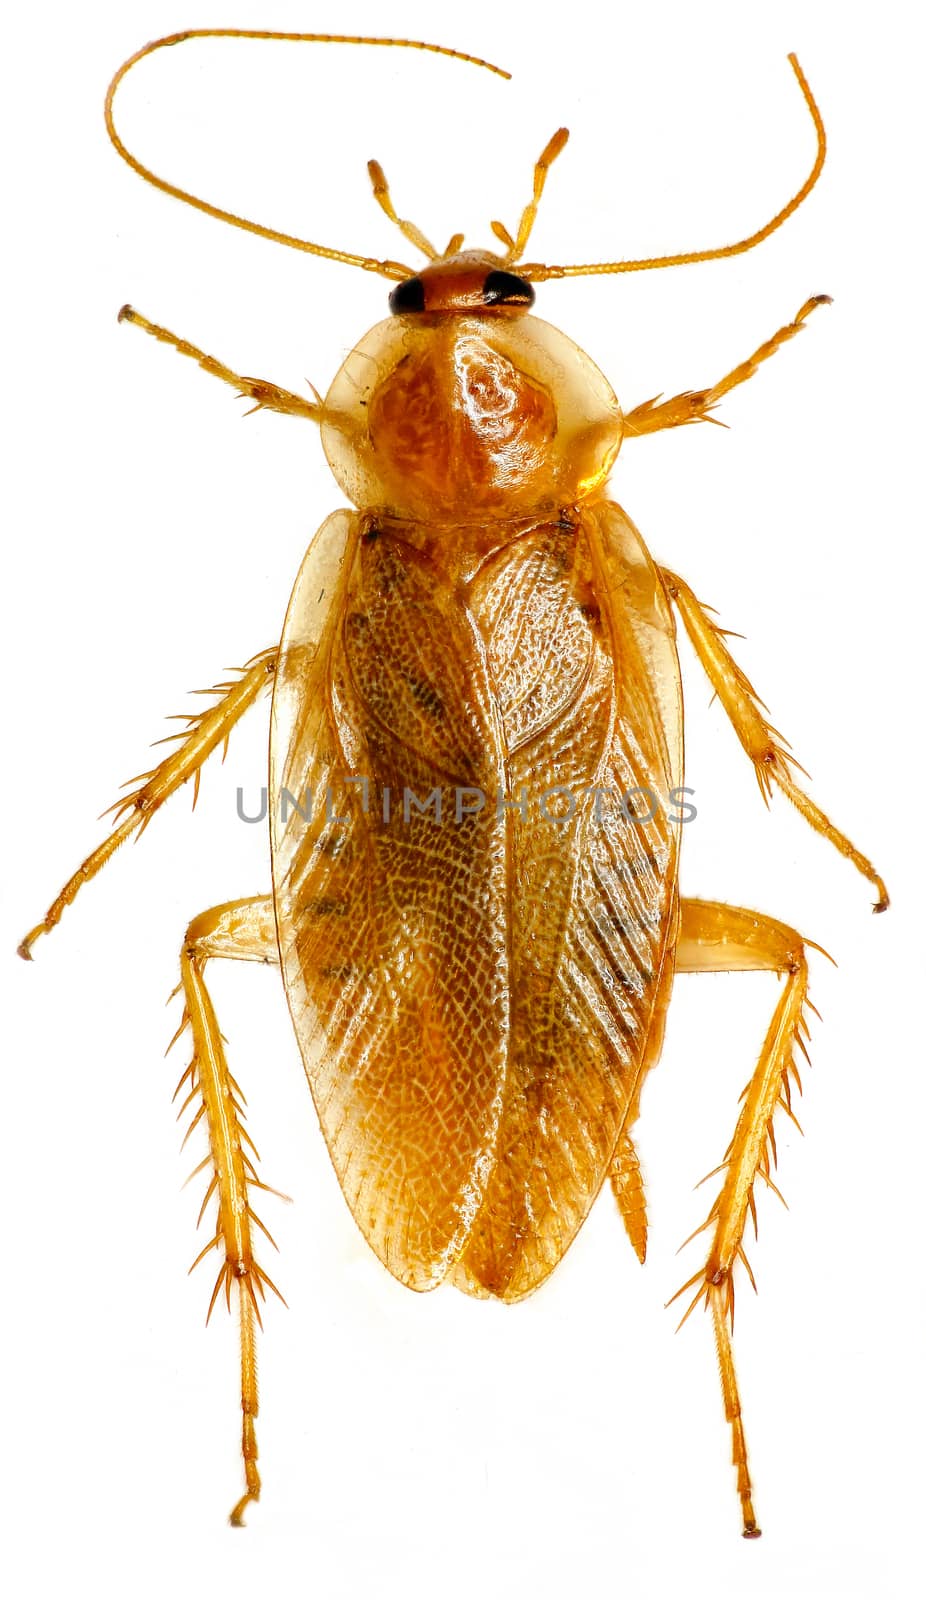 Cockroach on white Background  - Ectobius sp.